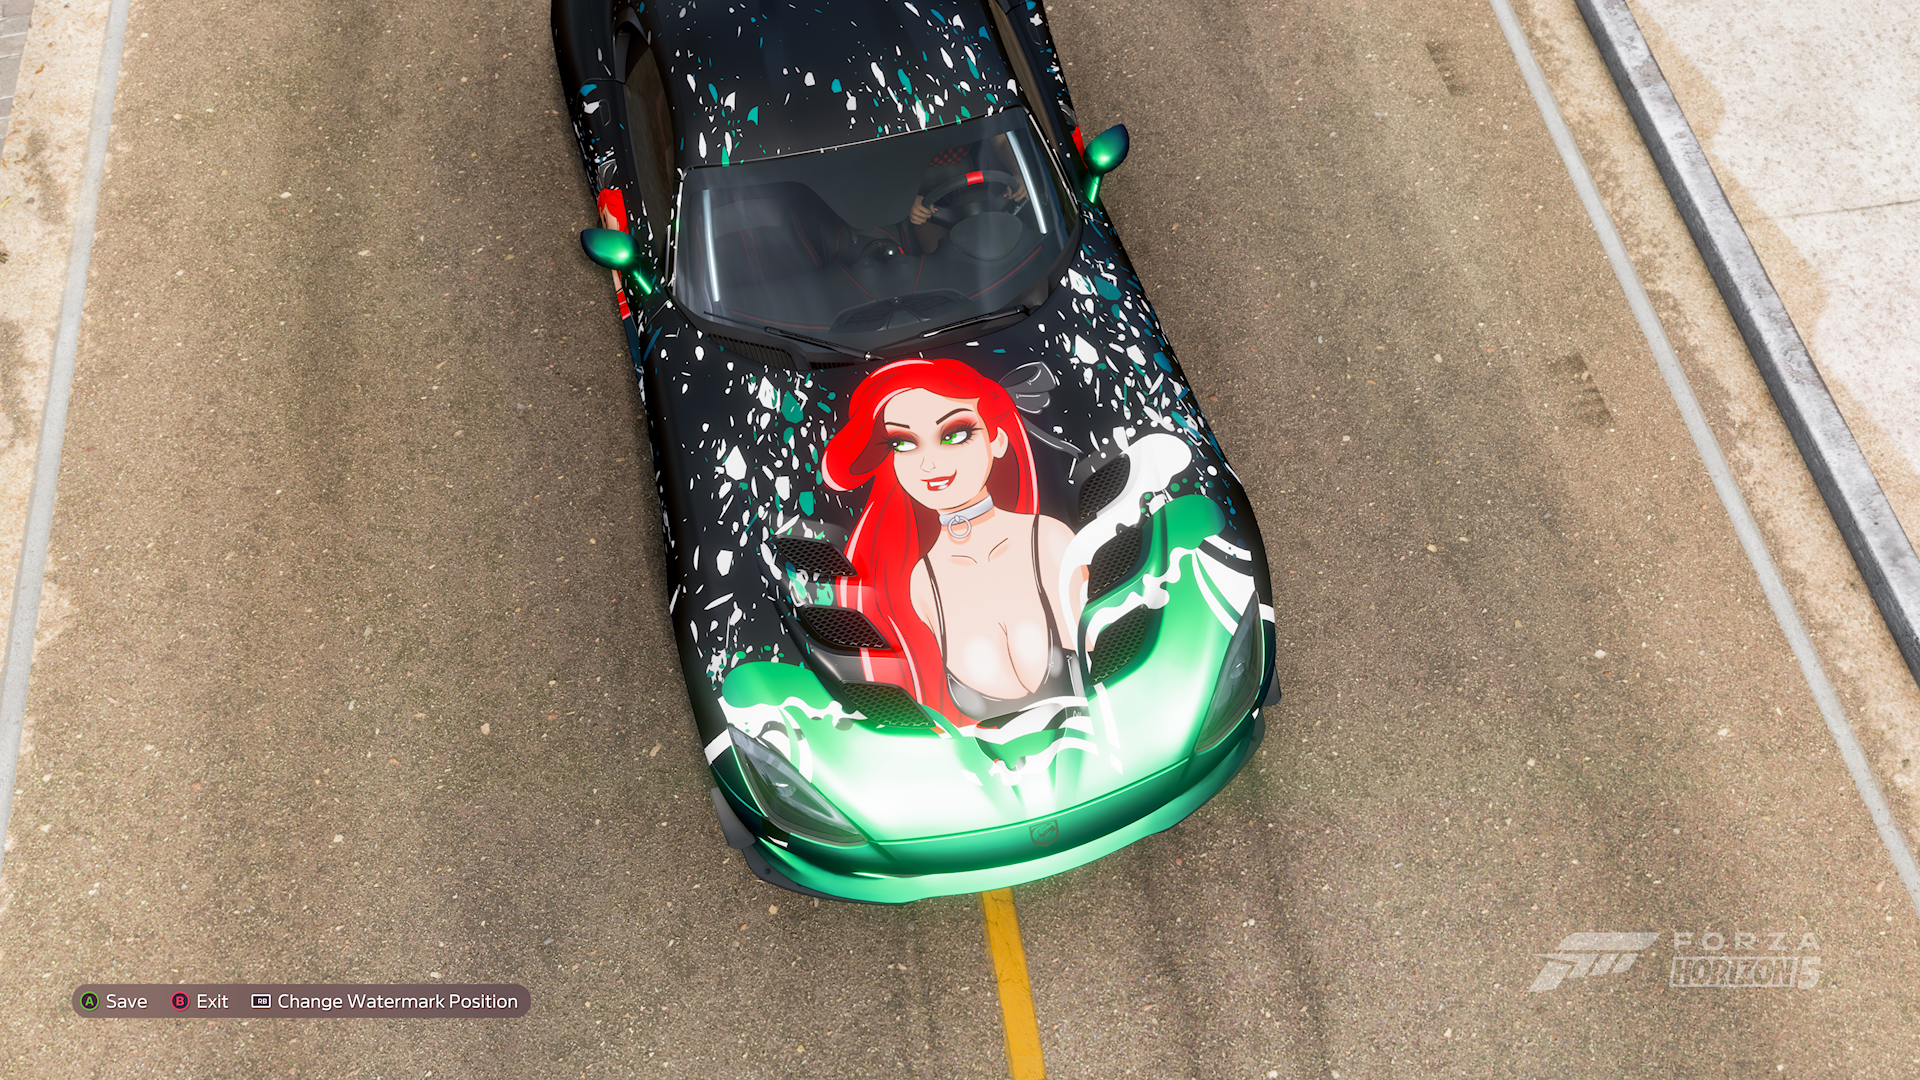 Gamer in Forza Horizon 5 got banned until 9999 for stickers with half-naked girls on cars